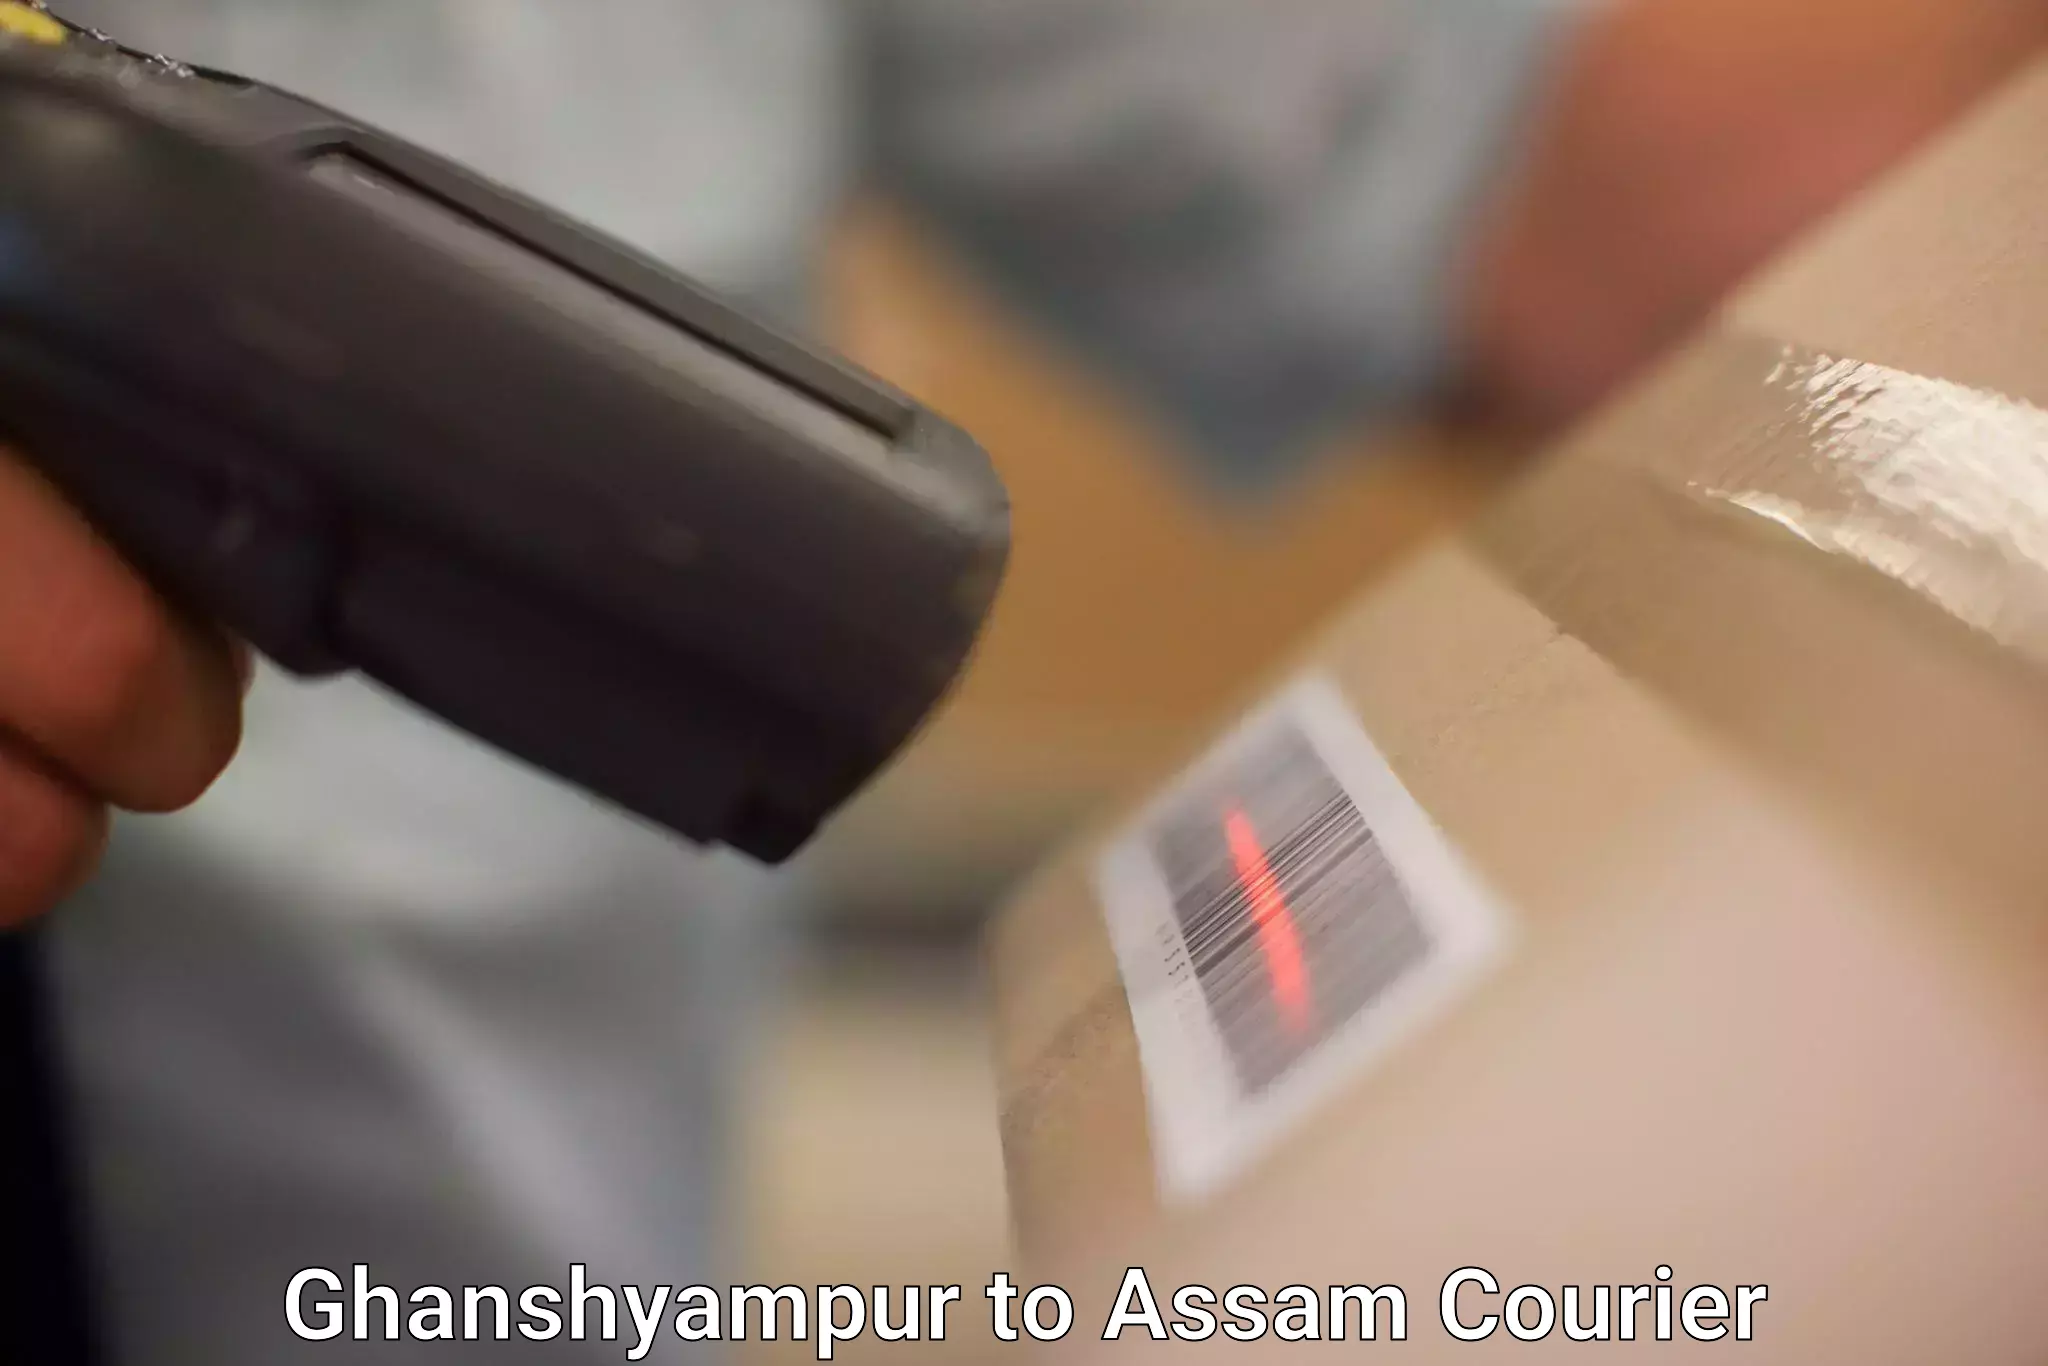 State-of-the-art courier technology Ghanshyampur to Sonari Charaideo